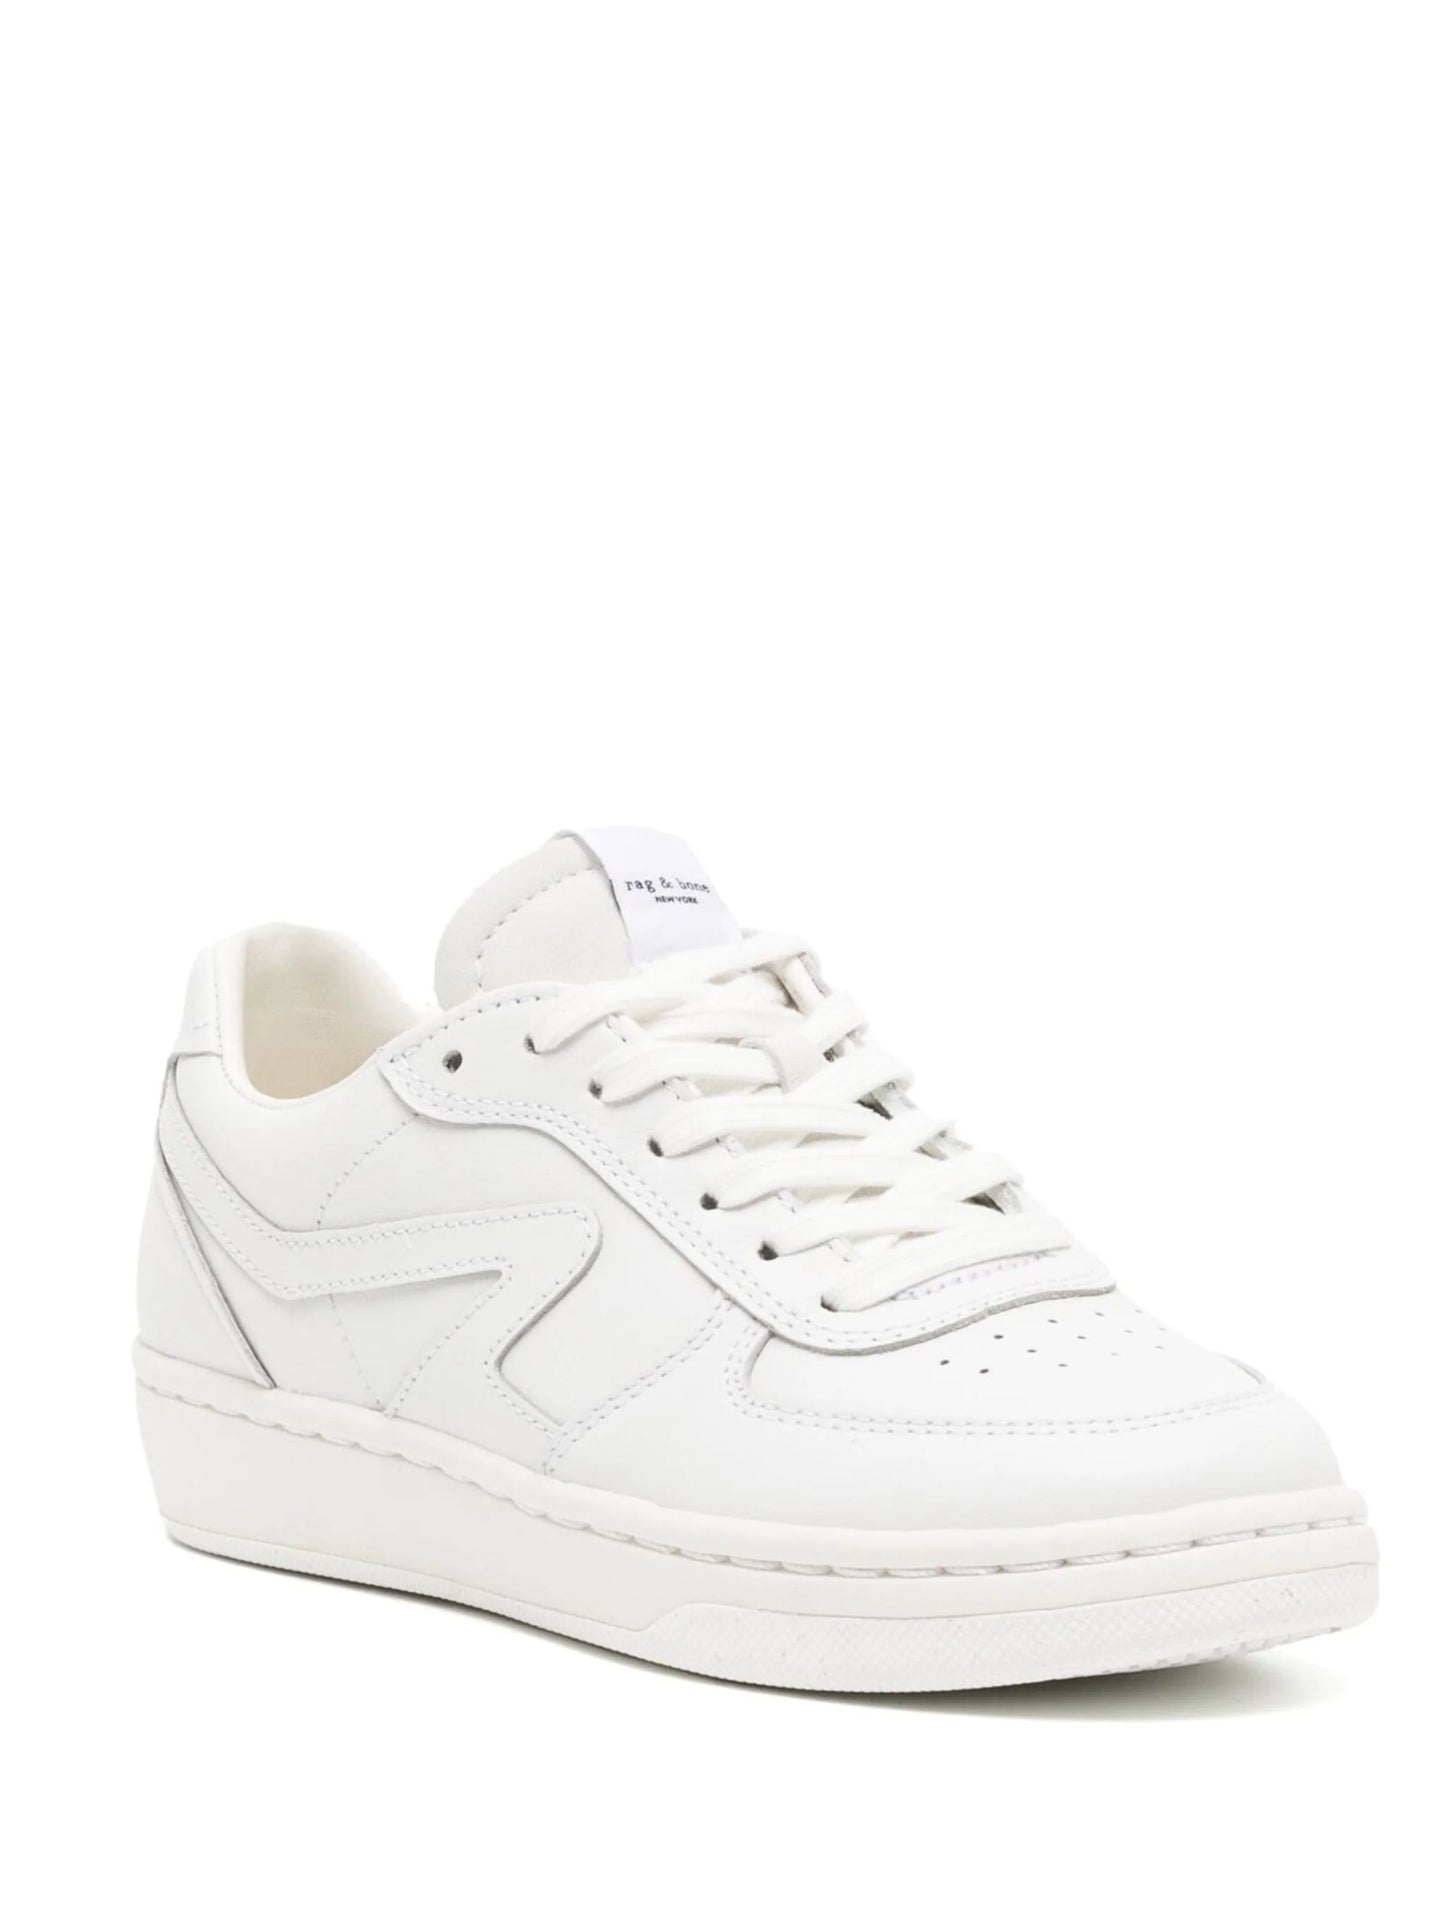 Rag And Bone Women Retro Court Lace Up Sneakers Rubber Shoes White